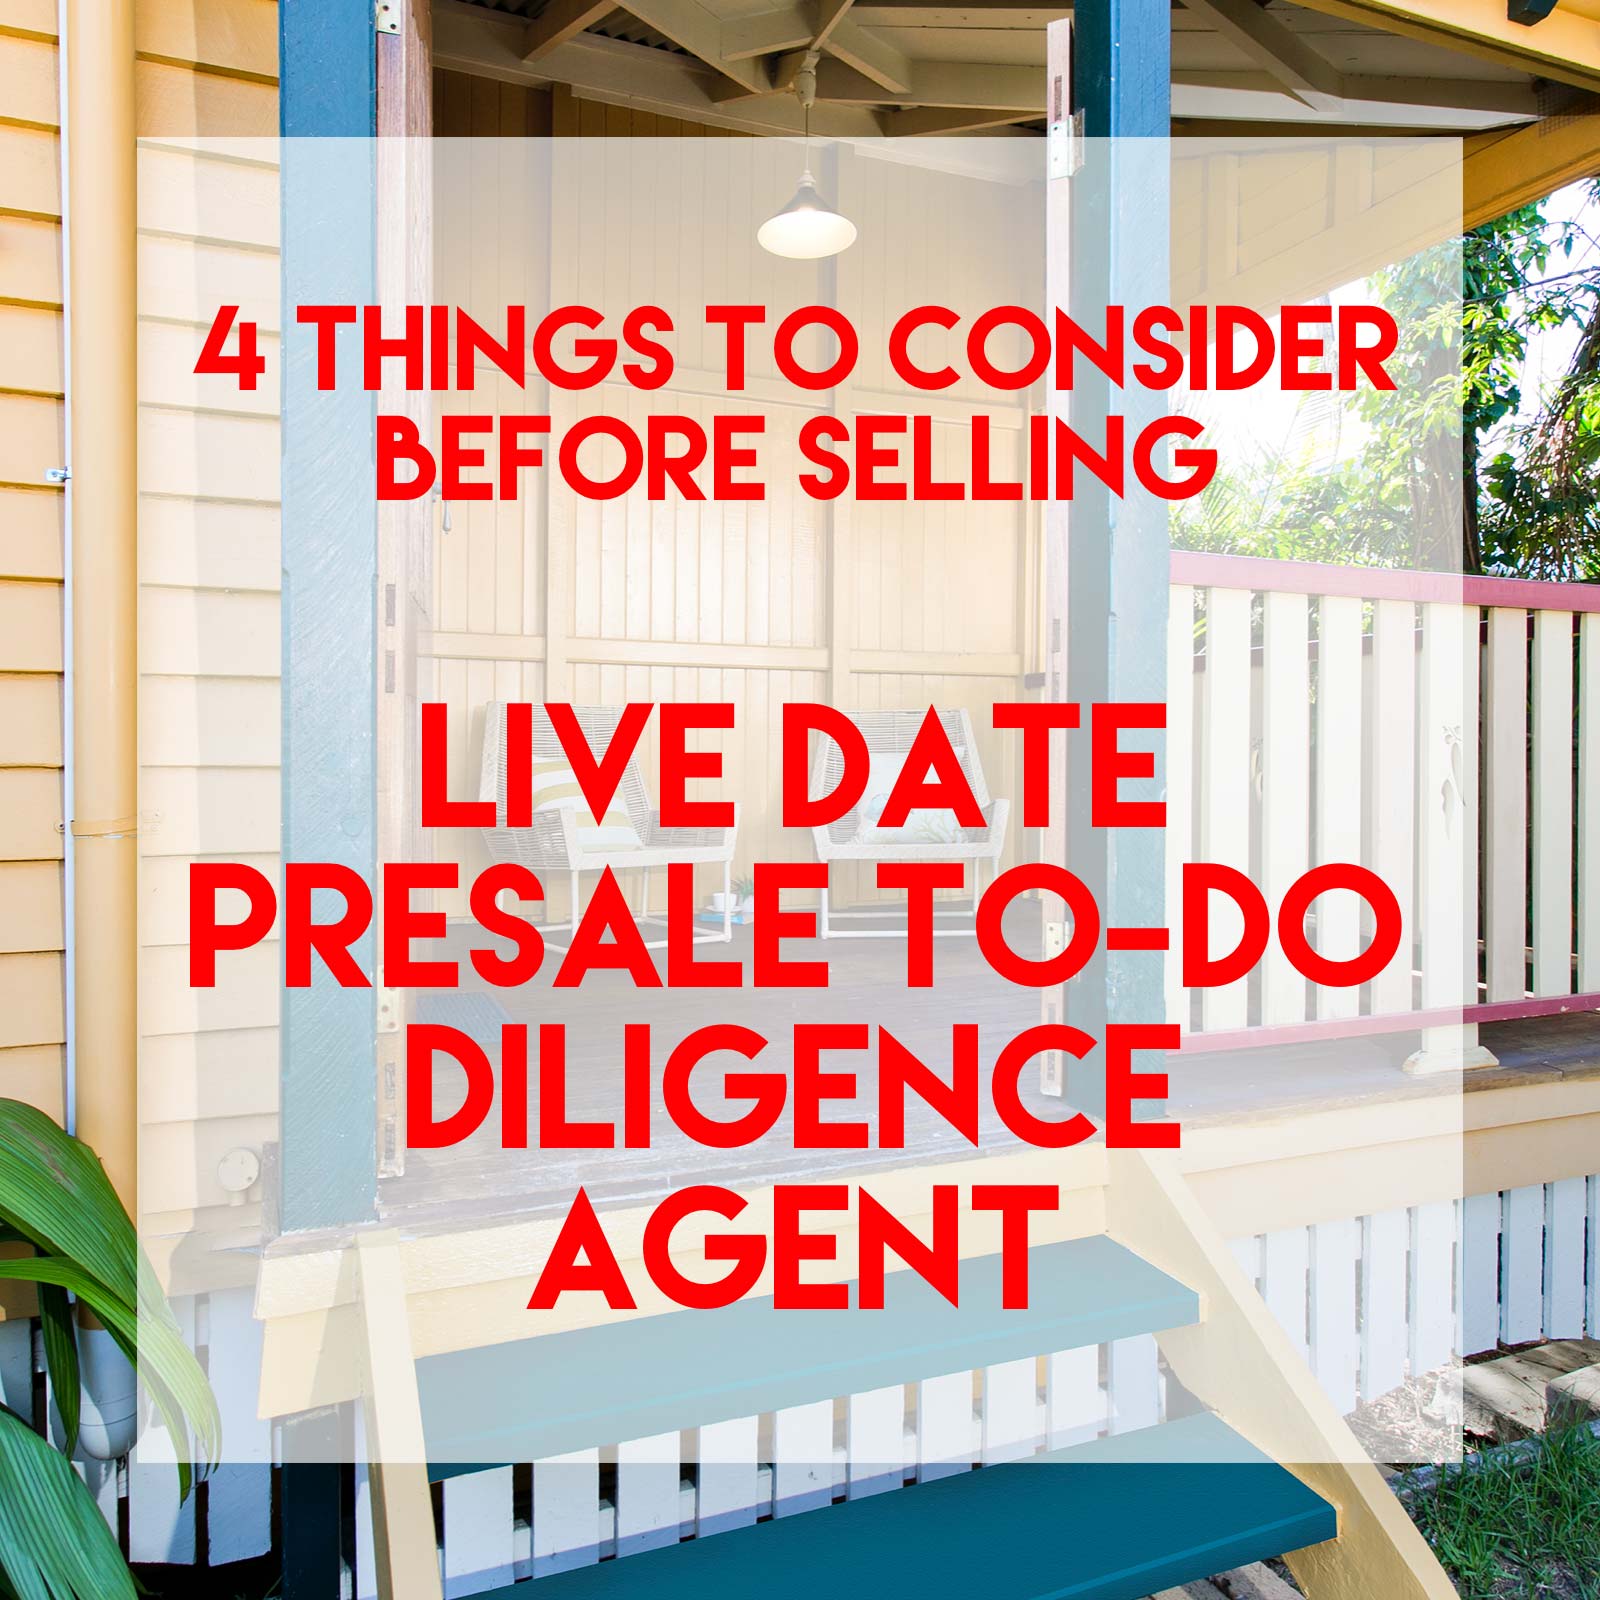 4 Things to Consider Before Selling